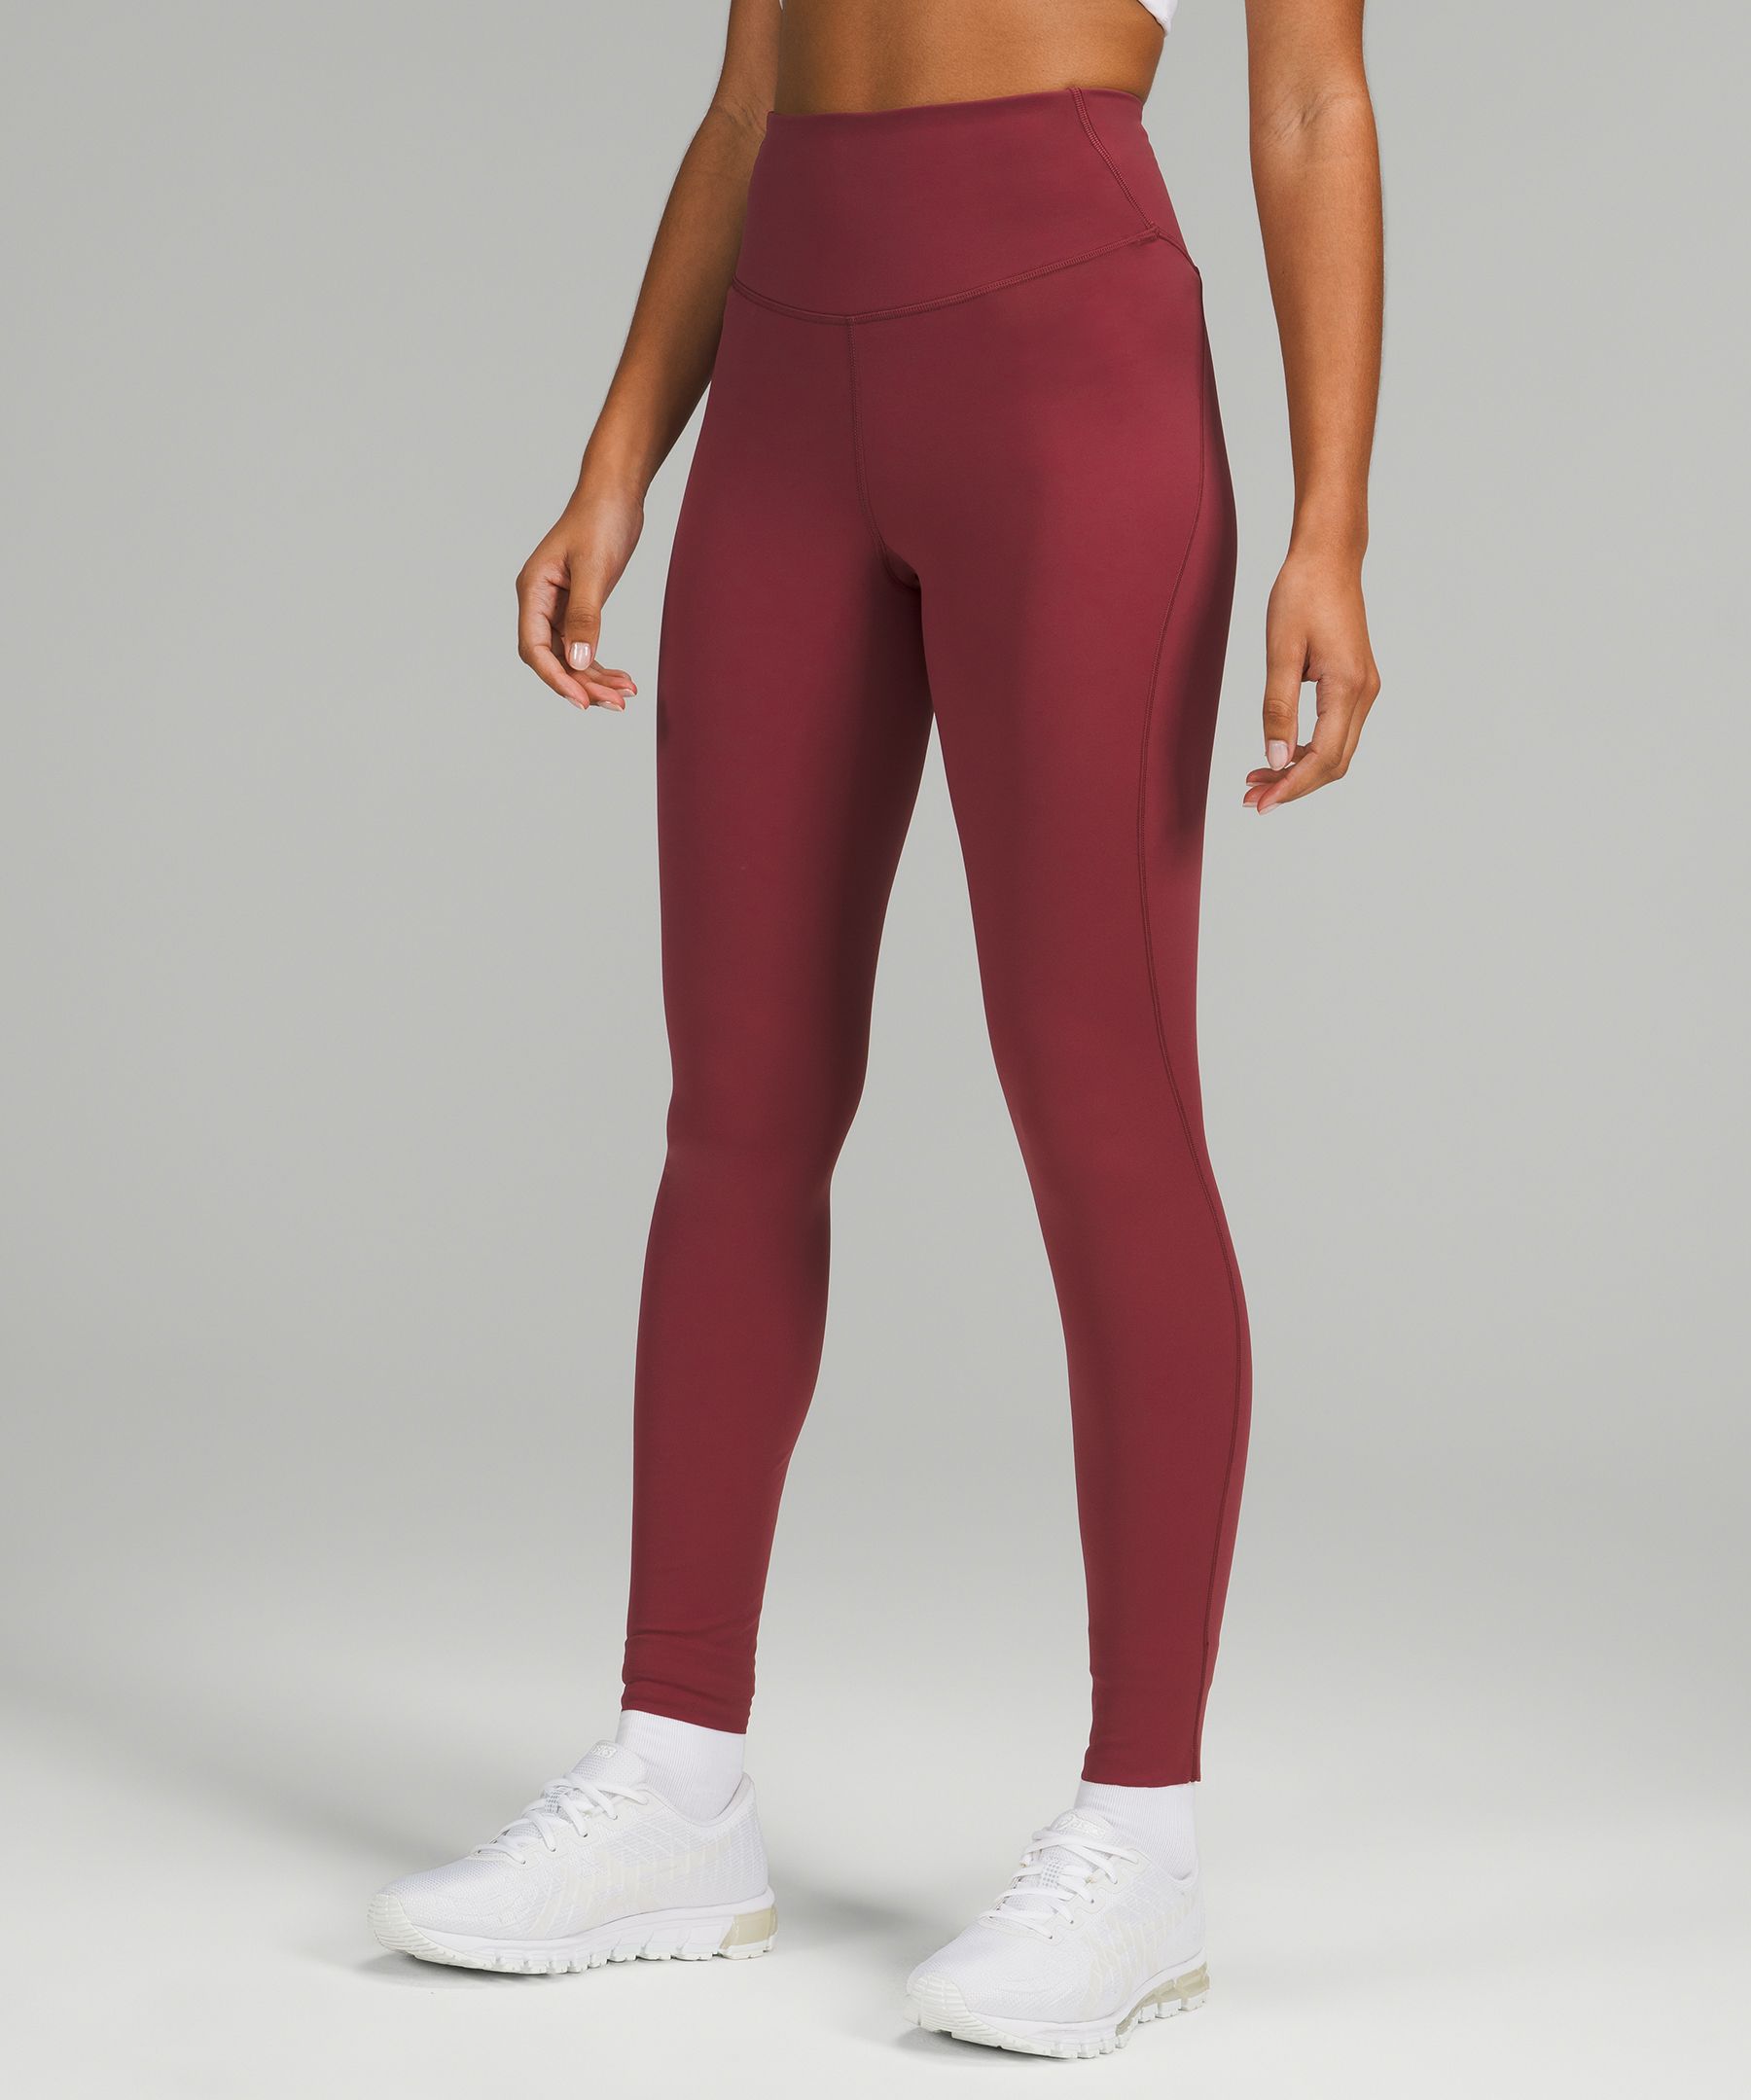 These Lululemon leggings are designed to beat the cold — and they